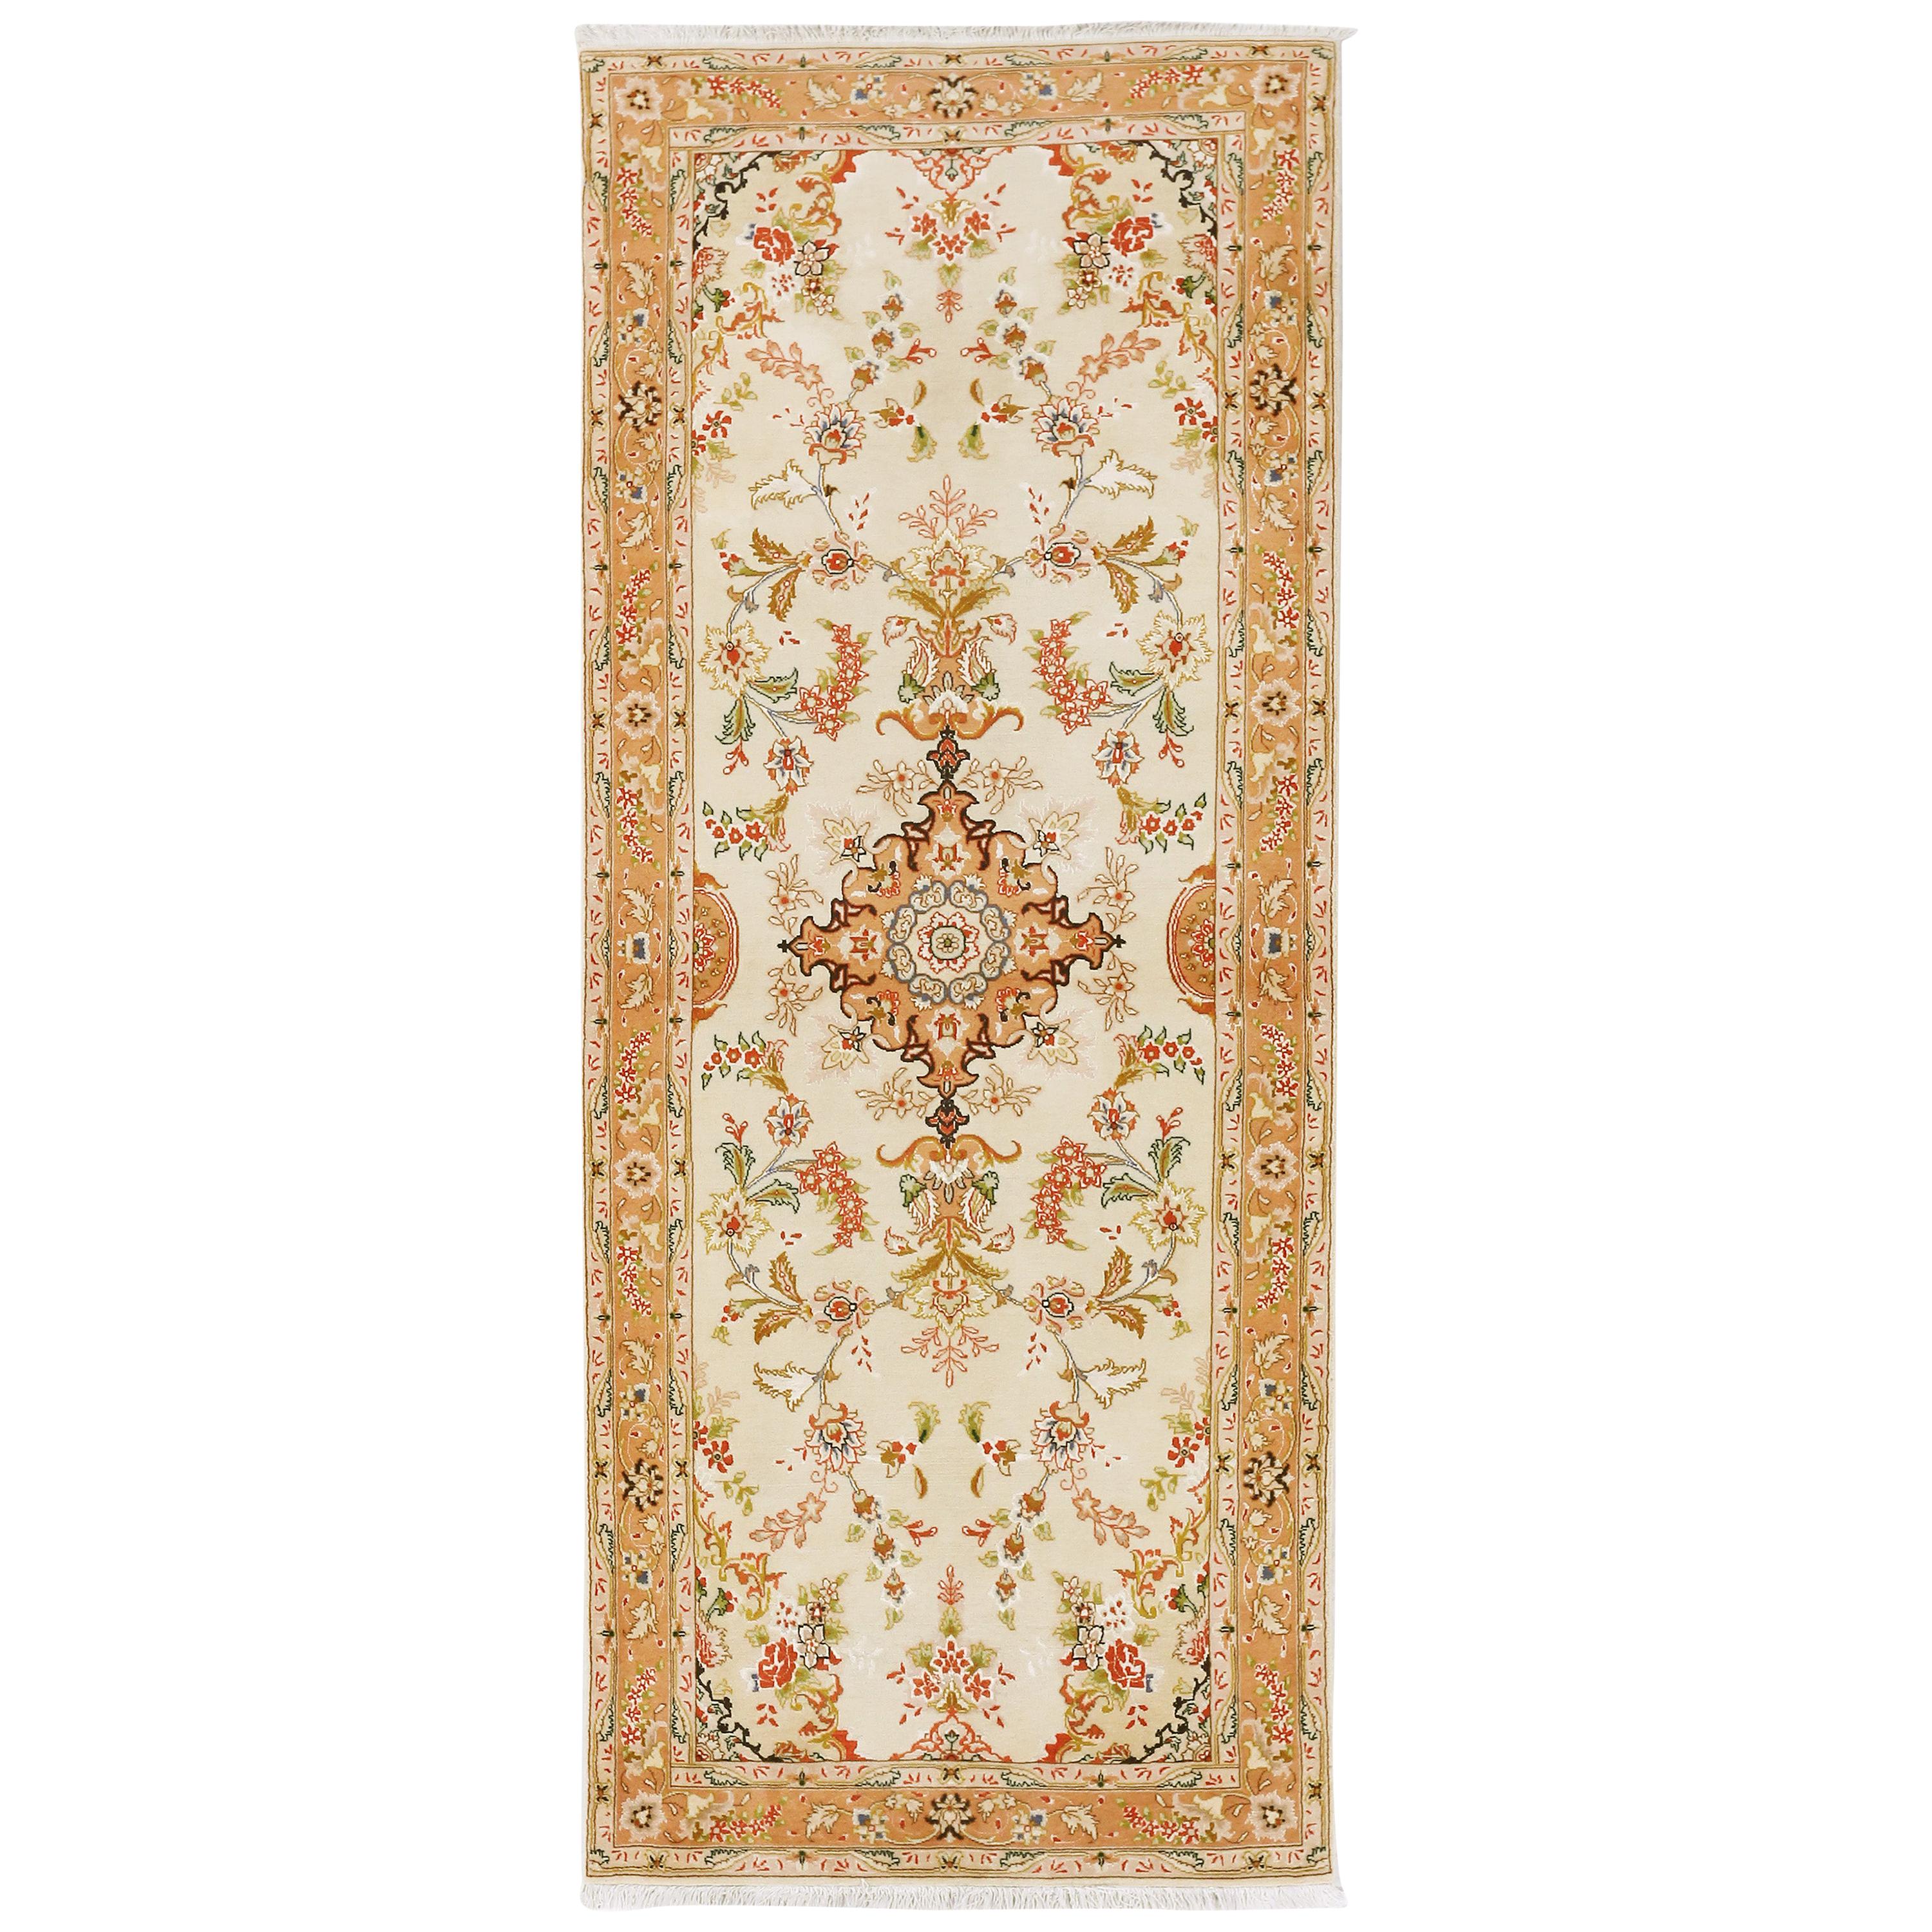 Antique Persian Tabriz Rug with Red and Brown Floral Details on Ivory Field